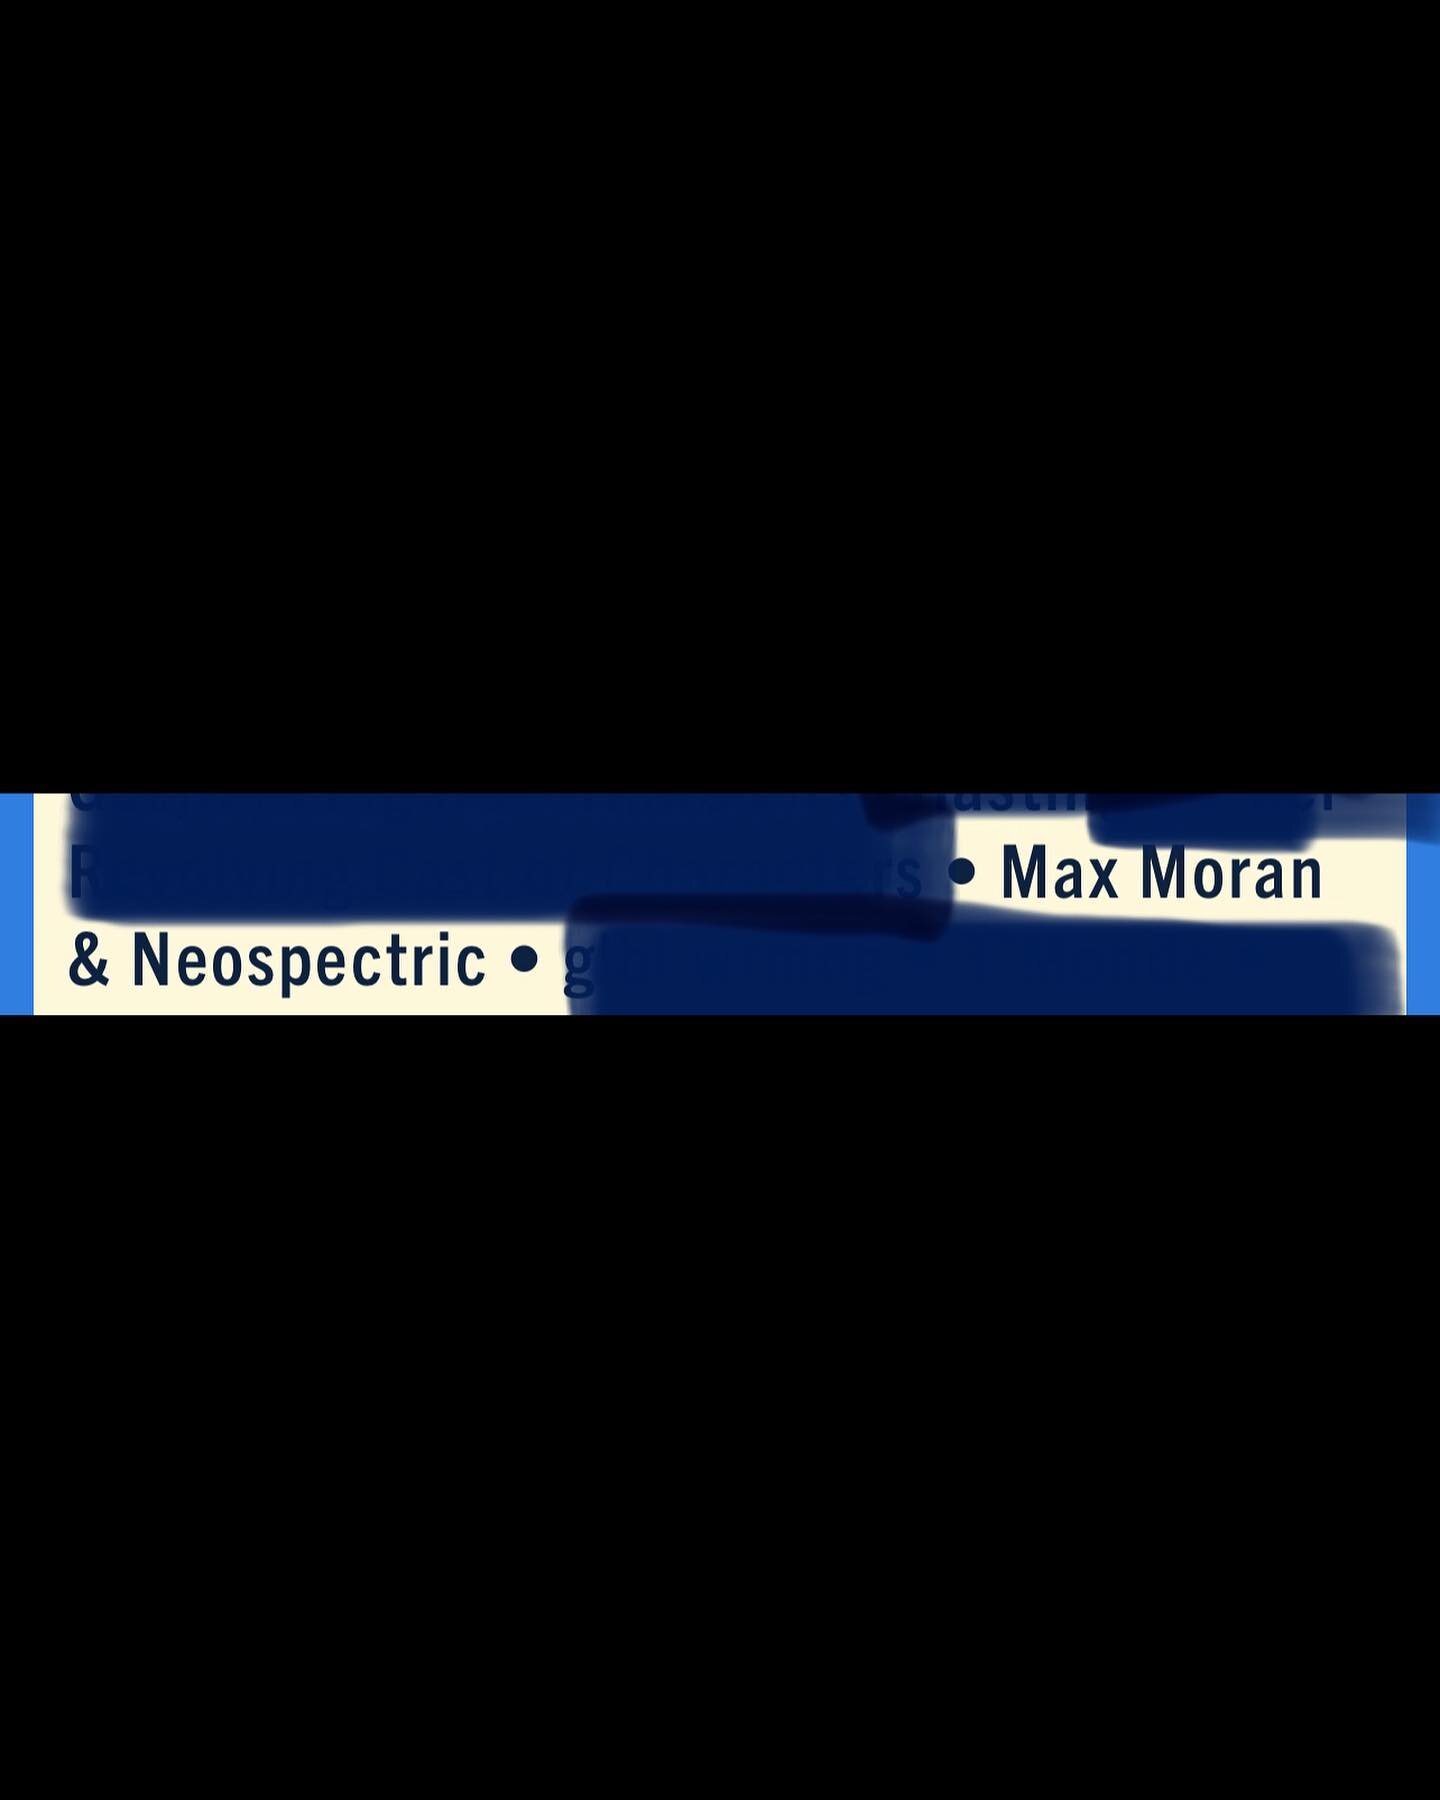 Imma say it for him since he can&rsquo;t! See you @jazzfest with my boy #MaxMoran and NEOSPECTRIC! Familiar sounding group:

@sheapierremusic 
@alfredjordanjr 
@juantigrerocks 
@gladneyofficial 

#nola #neworleans #jazzfest #music #newmusic #april28 